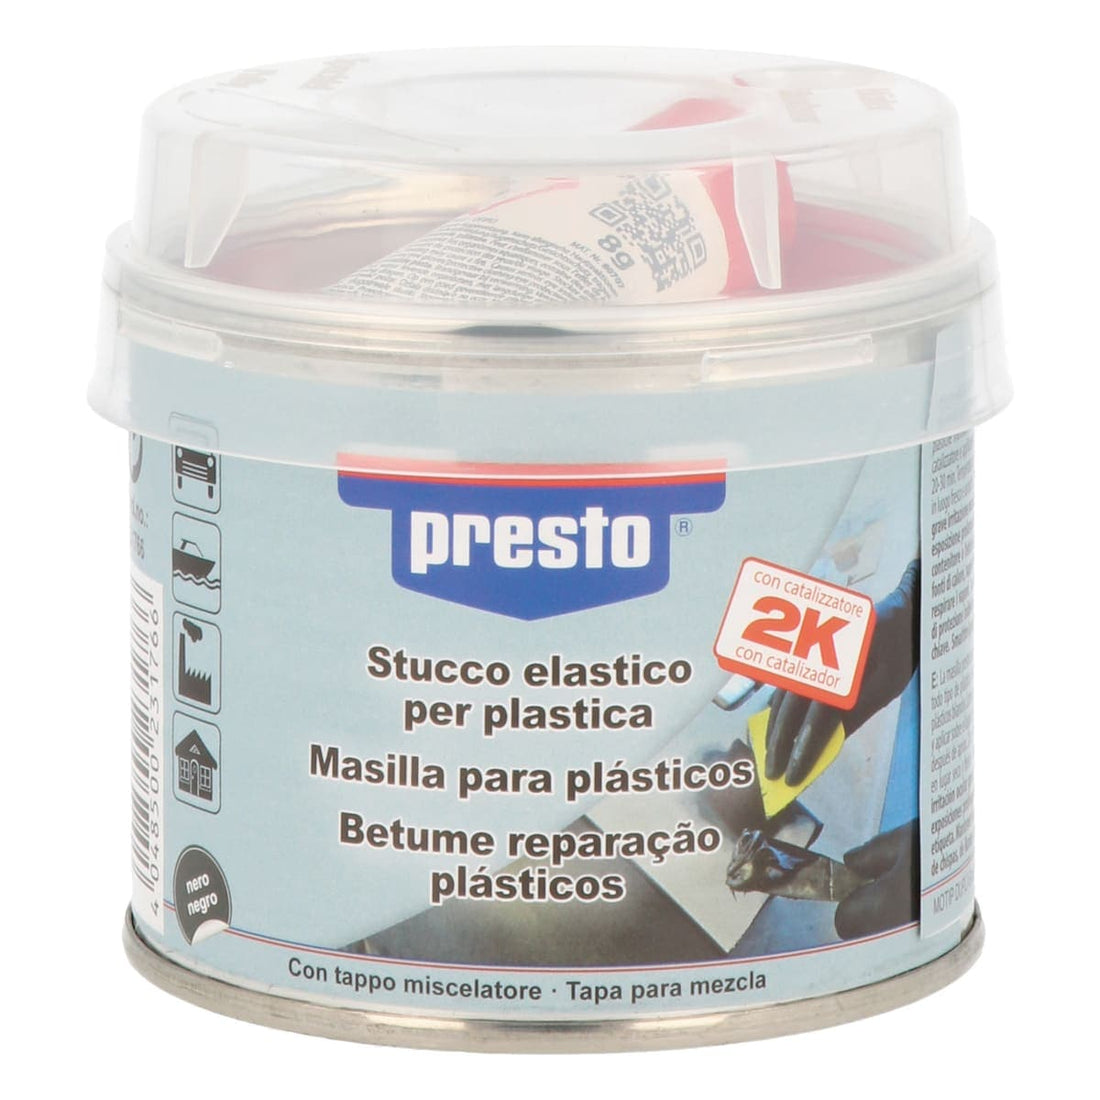 TWO-COMPONENT ELASTIC PUTTY FOR PLASTIC 250 G - best price from Maltashopper.com BR470000185